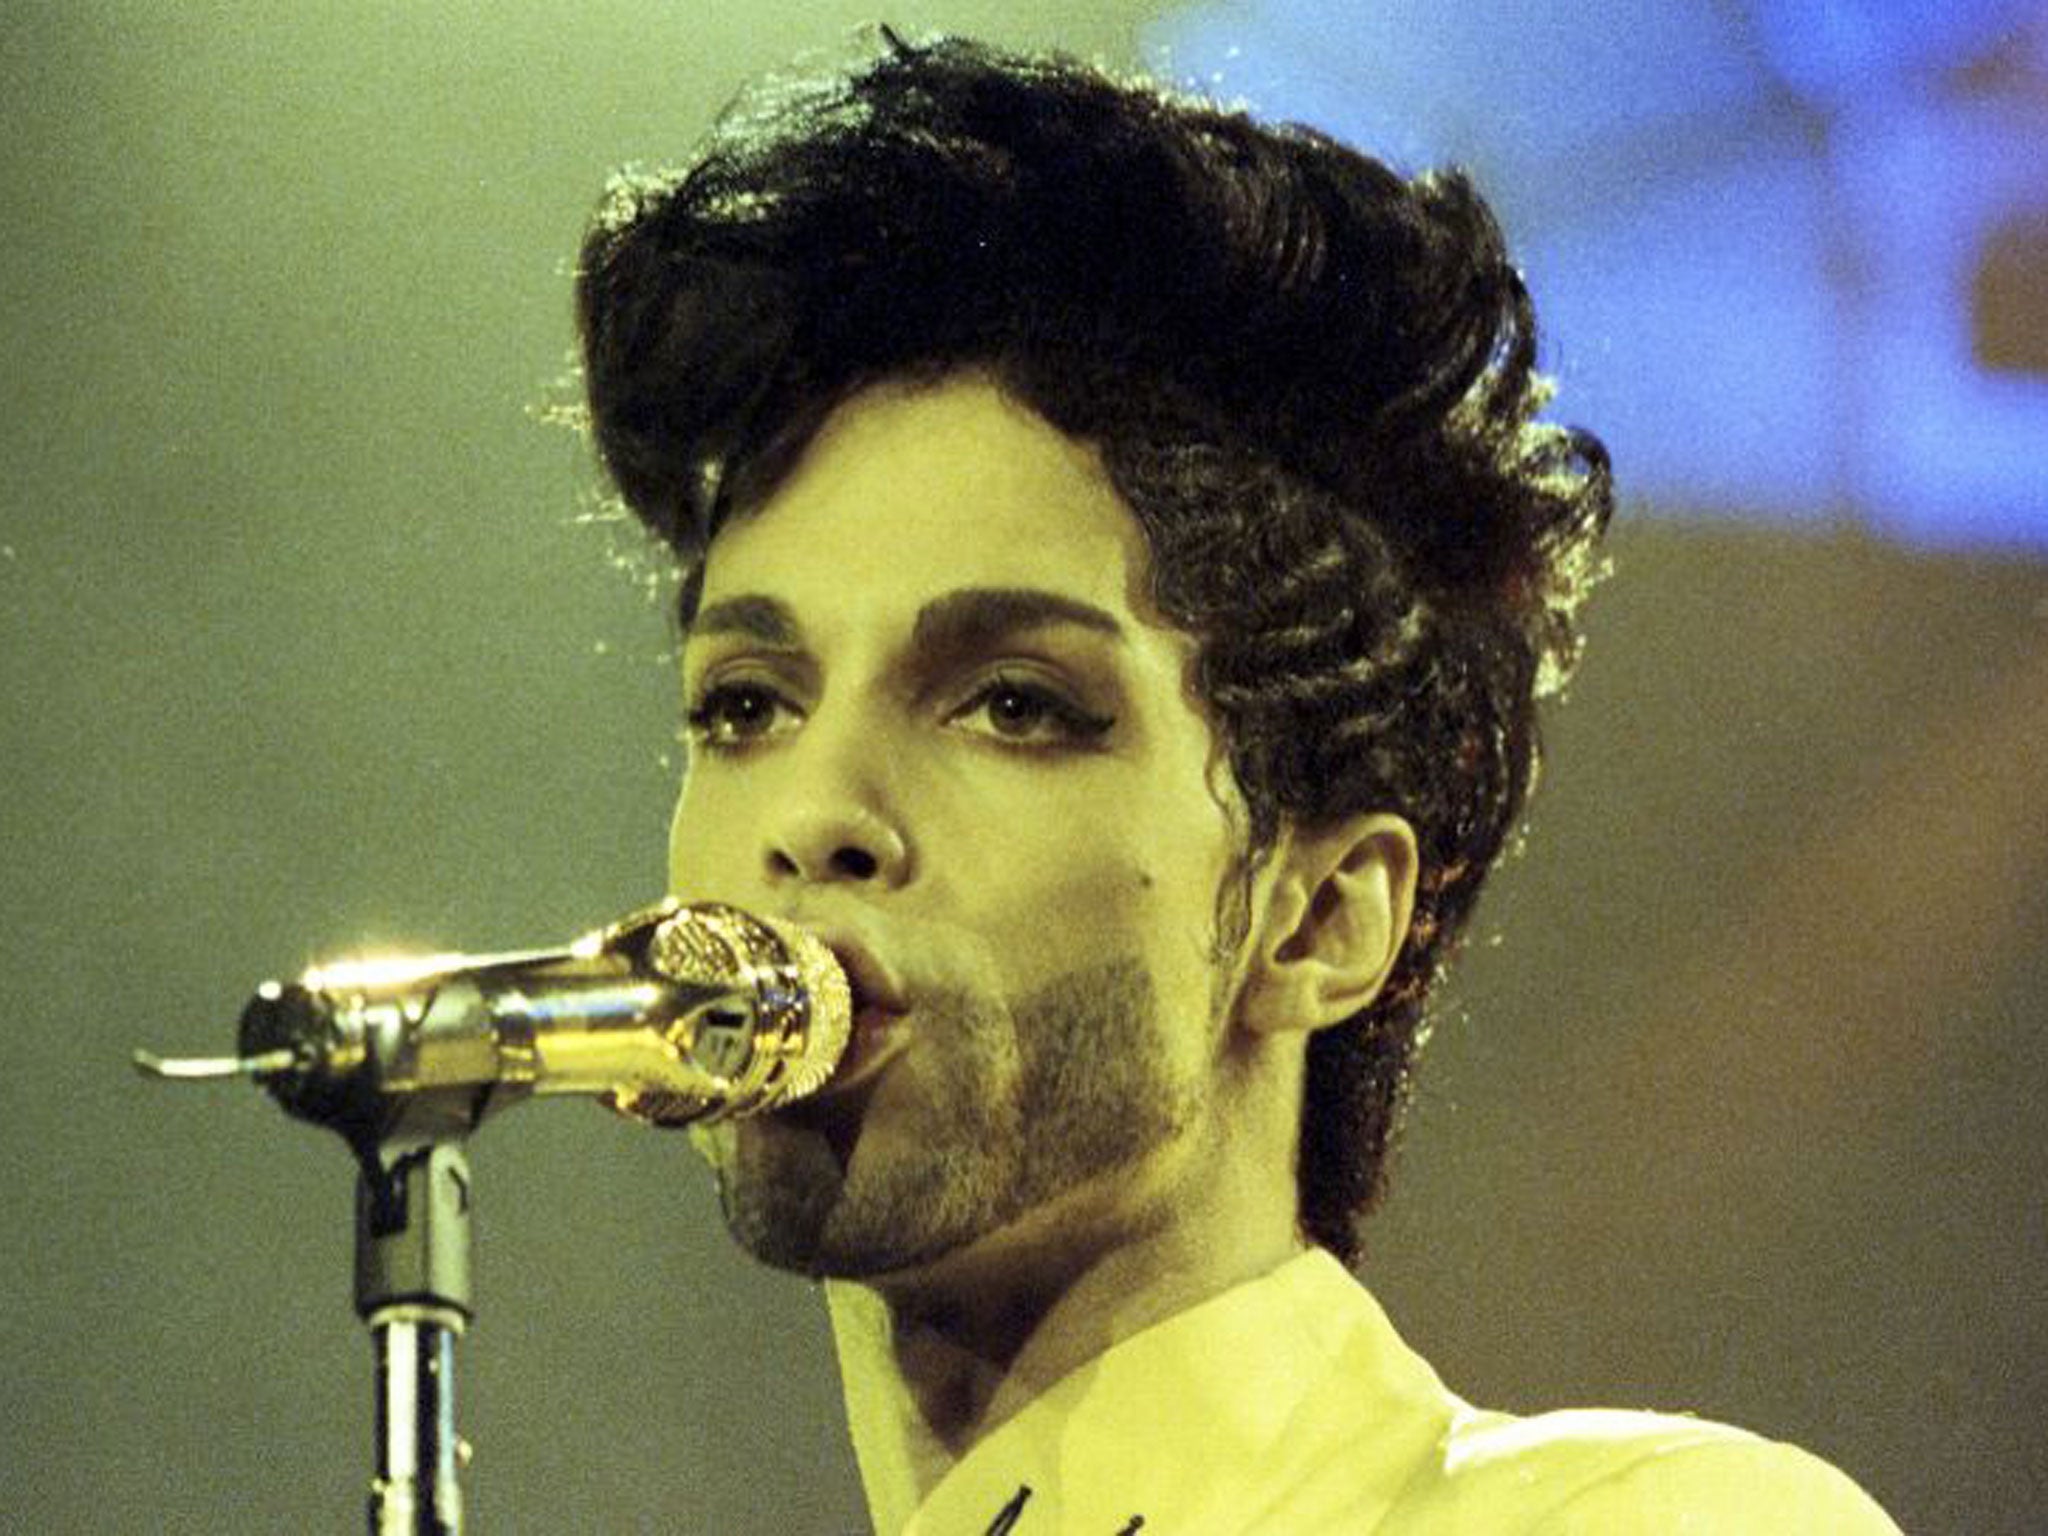 Prince on stage during his 'Diamonds and Pearls Tour' at the Earl's Court Arena, 1992